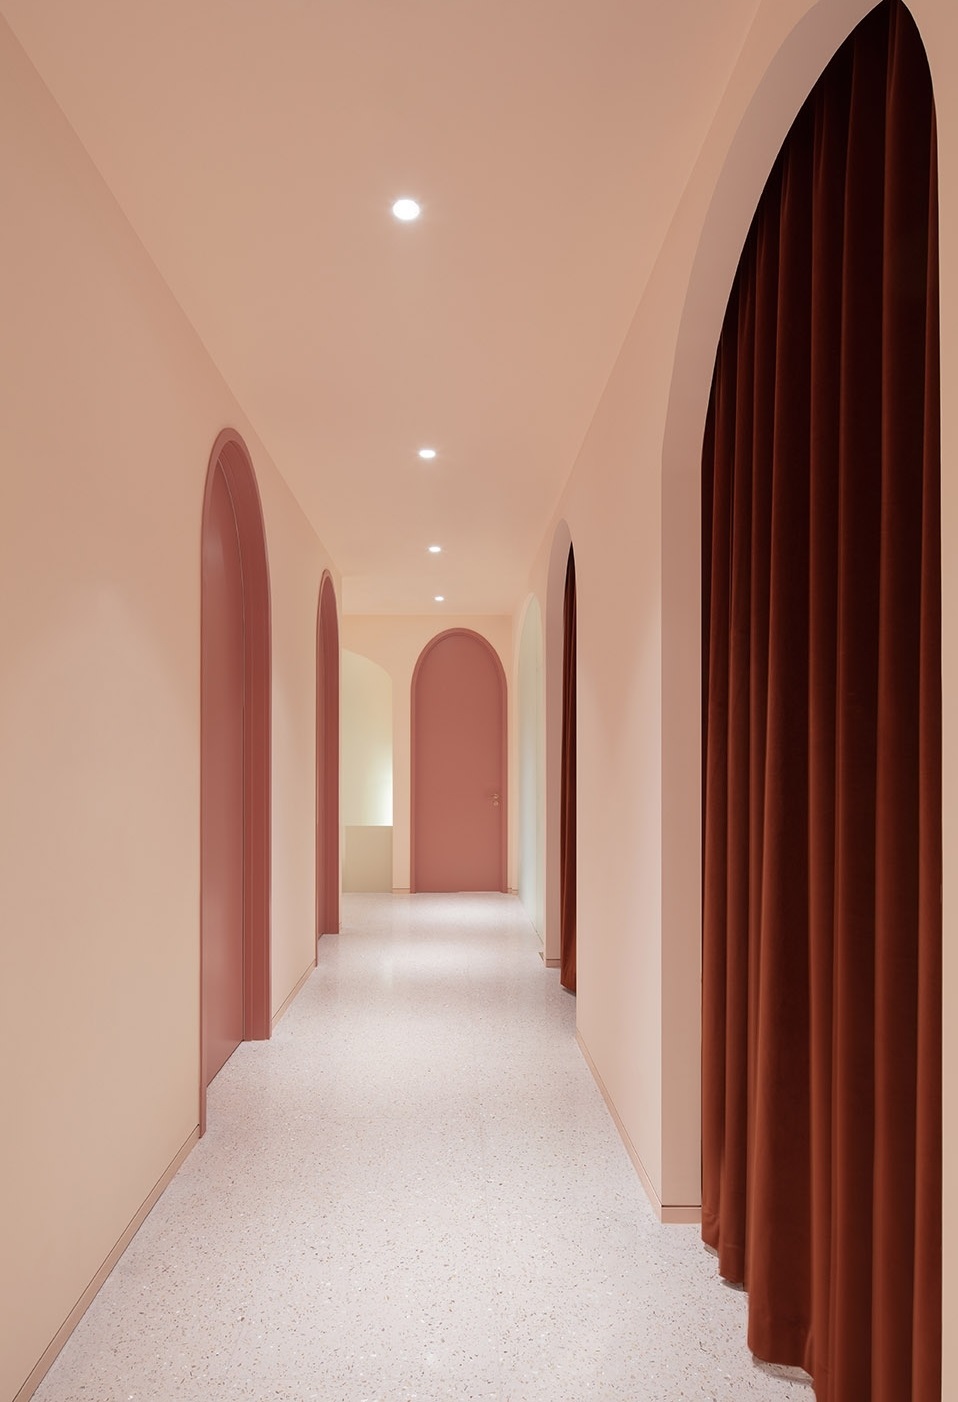 The corridor design of Narcissus Beauty Chain Store